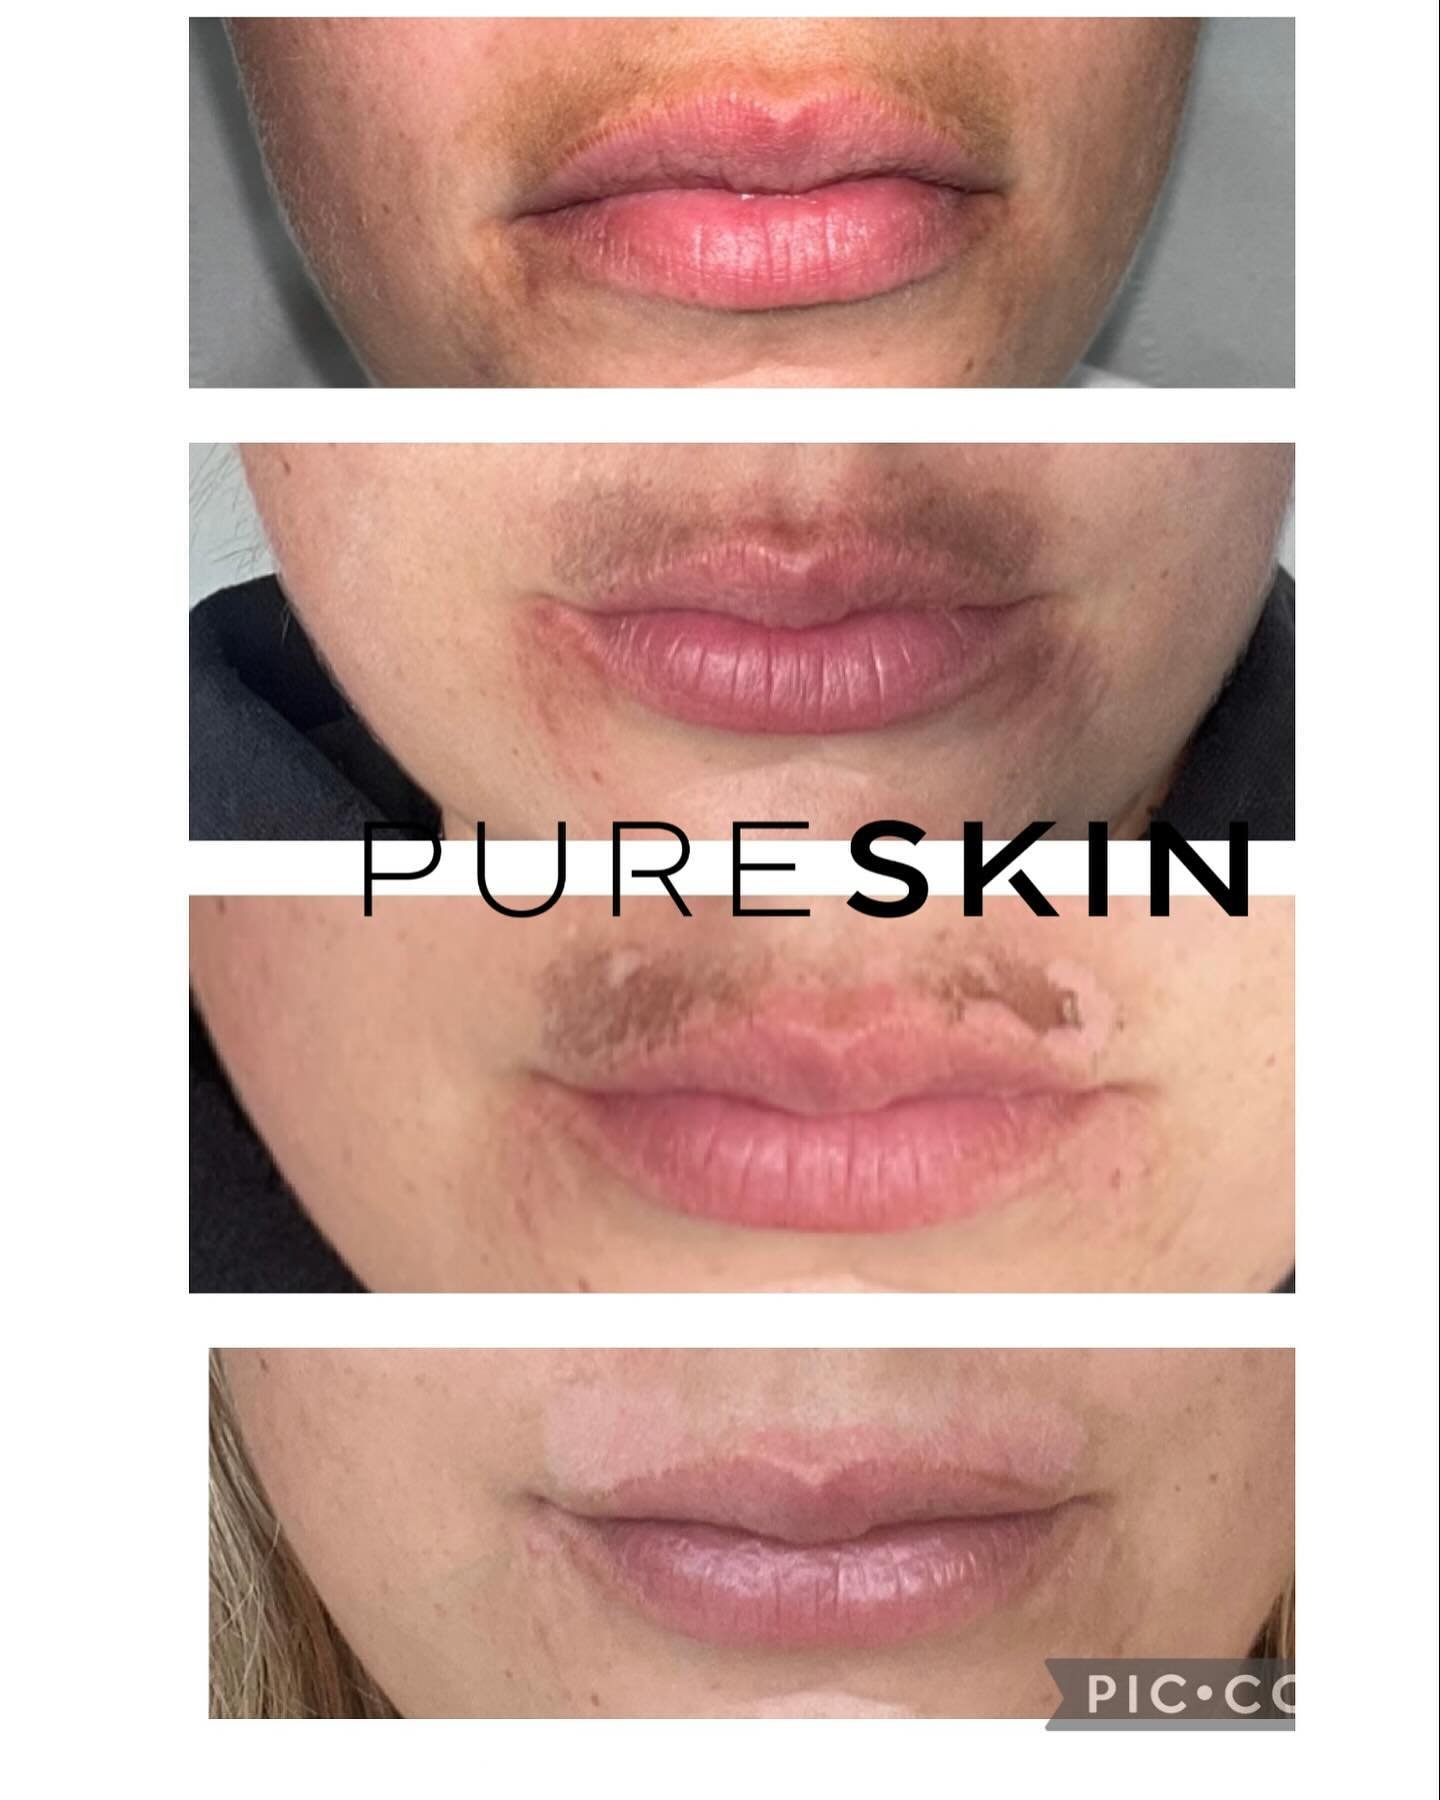 Pigmentation reduction/removal using the Pico pro laser - the most advanced laser technology 🤩
We specialise in the reduction/removal of pigmentation and are so pleased to share these amazing results after only 6 days post treatment. 
We can treat a